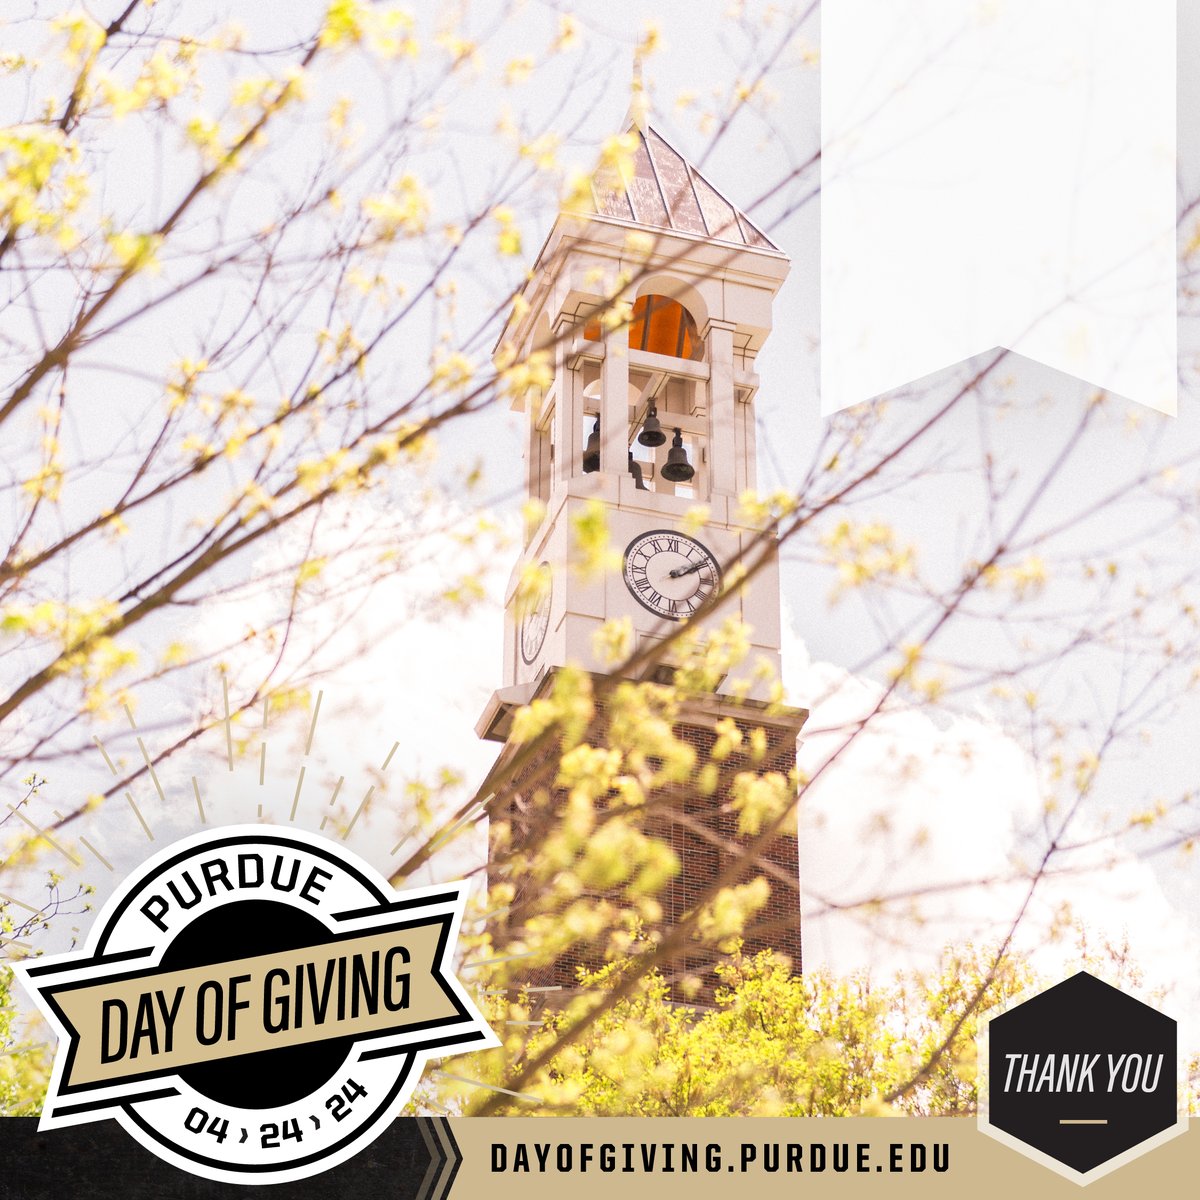 We are ever grateful to Abraham (PhD HHS ’67, MS HHS ’65) and Carmen Tesser for their commitment of a generous gift to @Purdue_PsychSci for #PurdueDayofGiving.